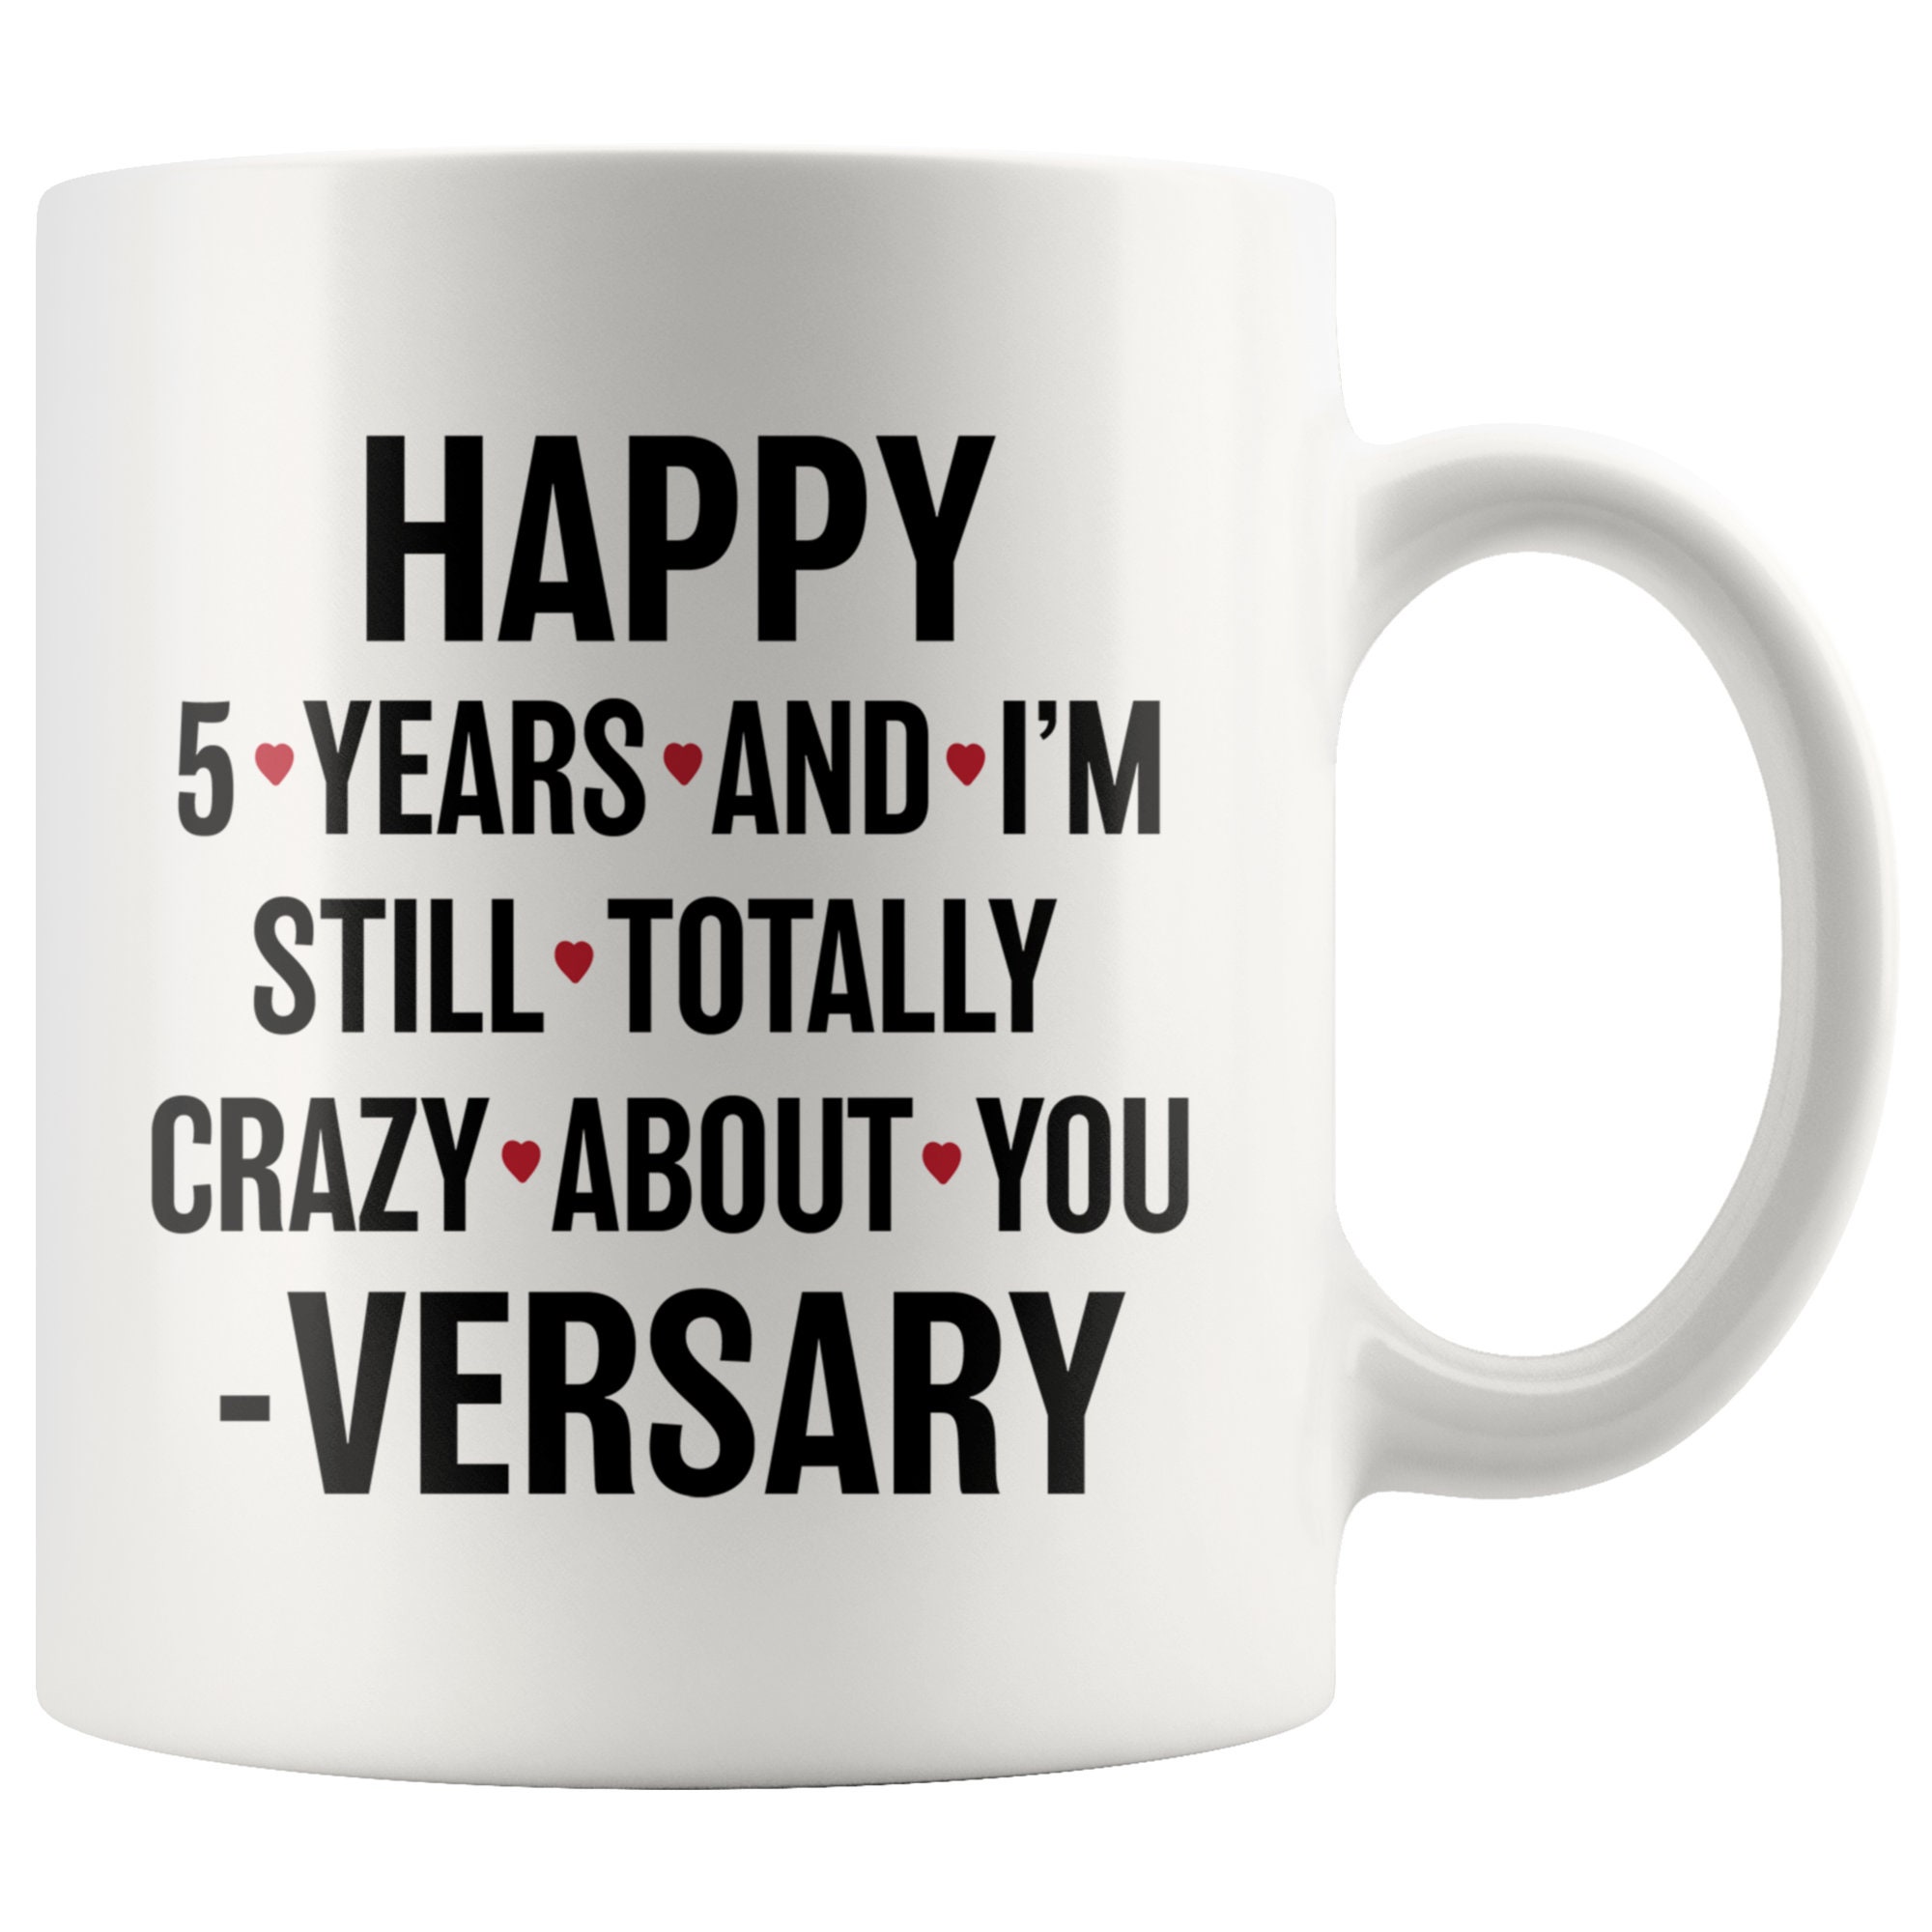 5 Year Anniversary Gifts for Men and Women, 5th Anniversary Gift for Him, 5  Anniversary, 5 Year Anniversary, 5th Wedding Anniversary 